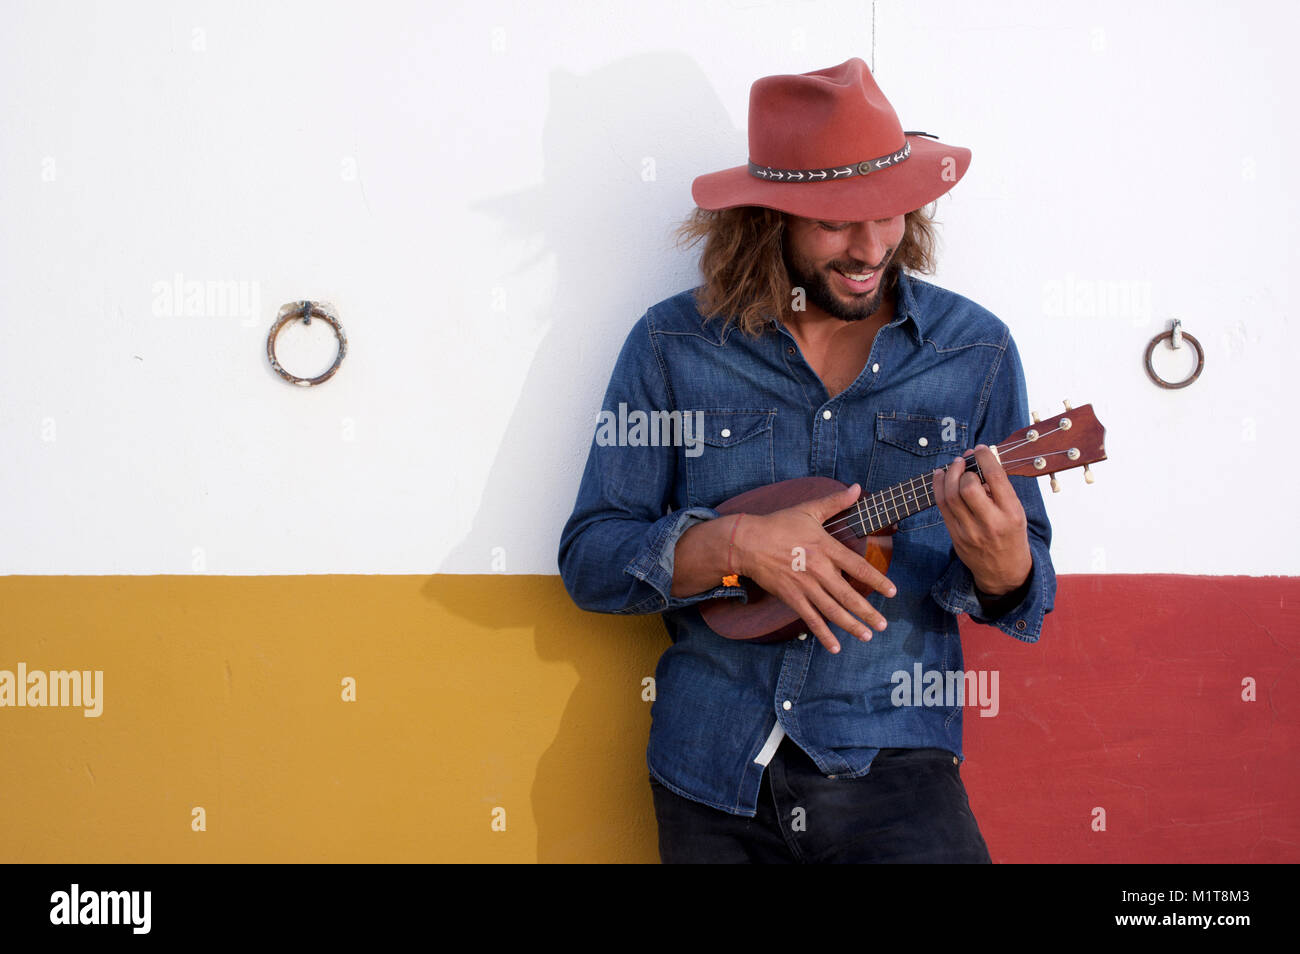 Man in red hat strumming a ukulele Stock Photo